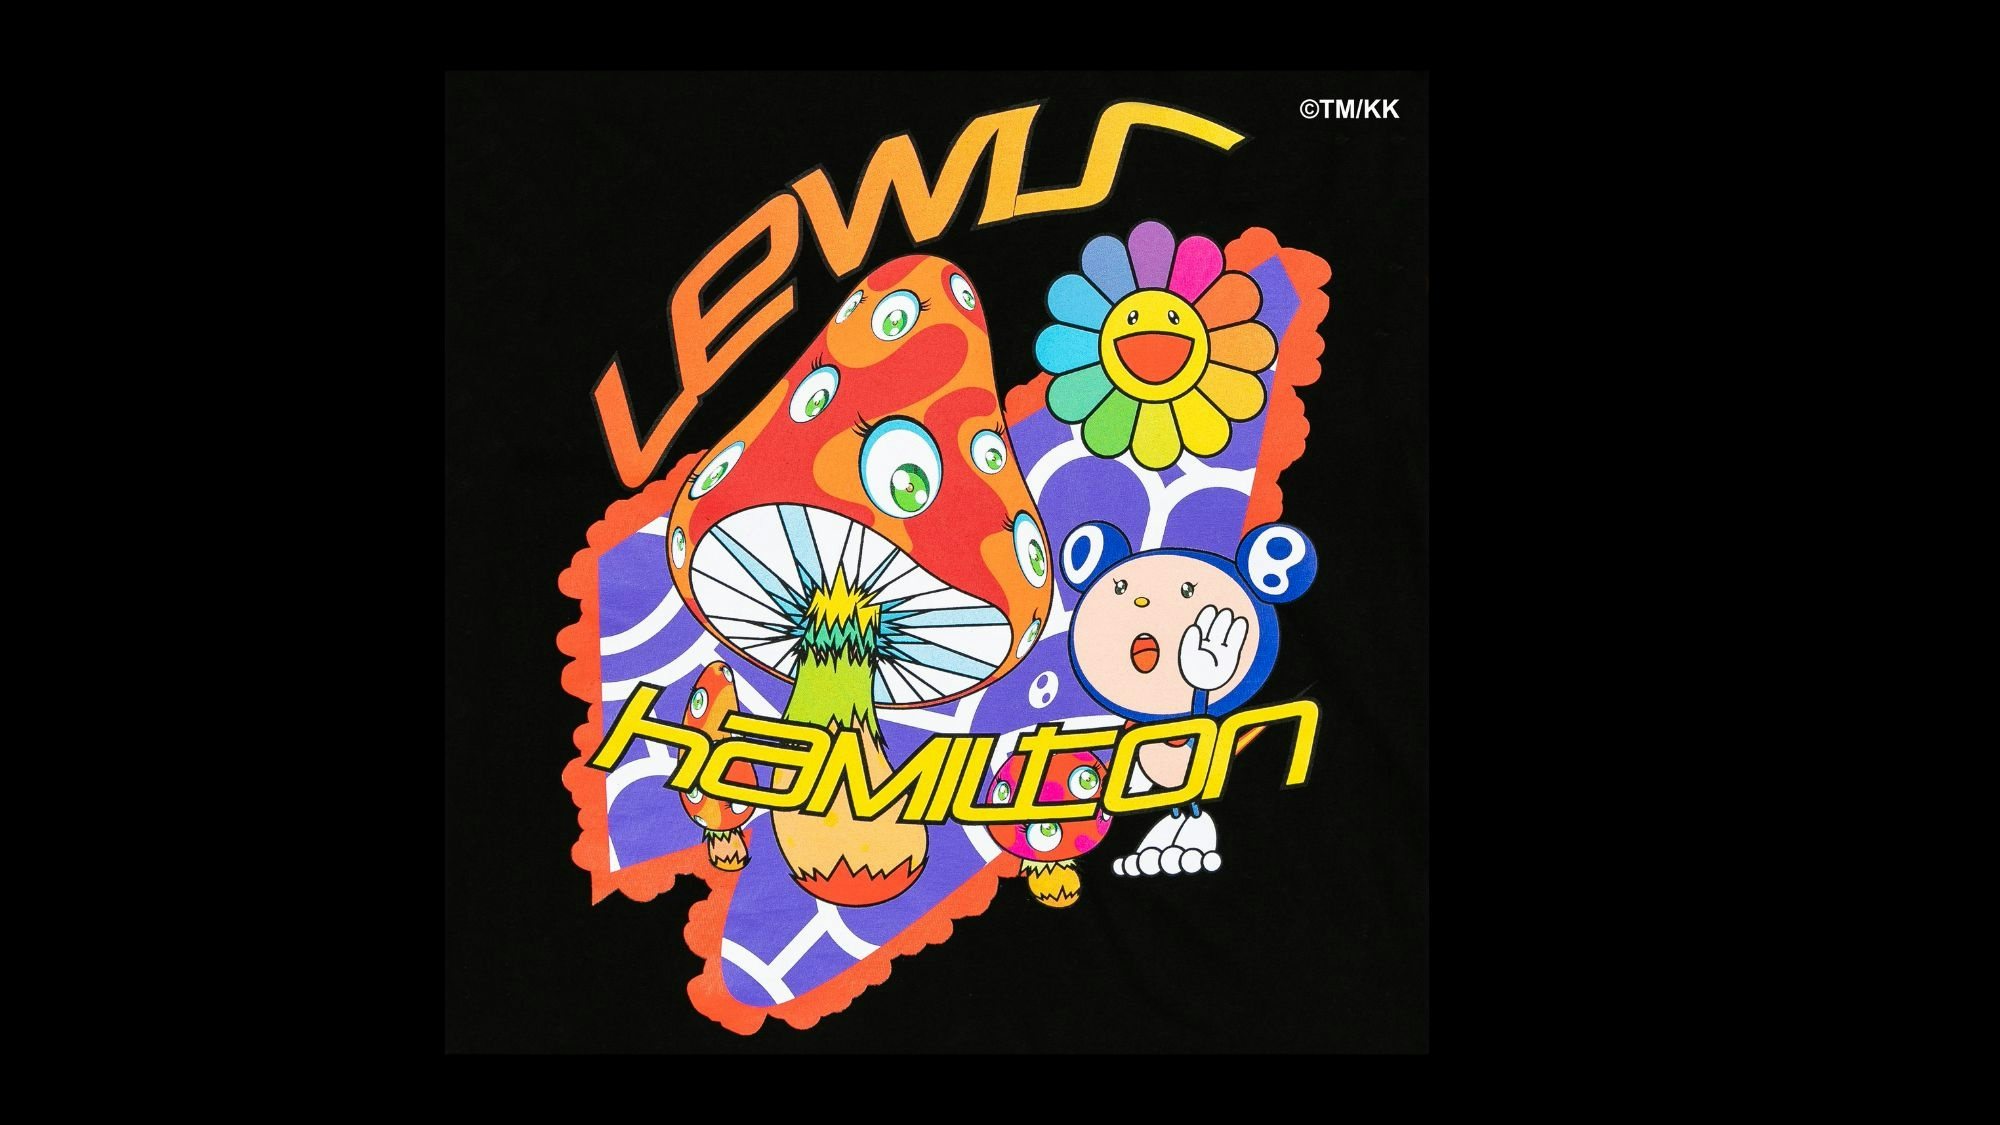 Lewis Hamilton and Takashi Murakami have reunited on a second collaboration, merging their cultural influences for the Las Vegas F1. Photo: +44